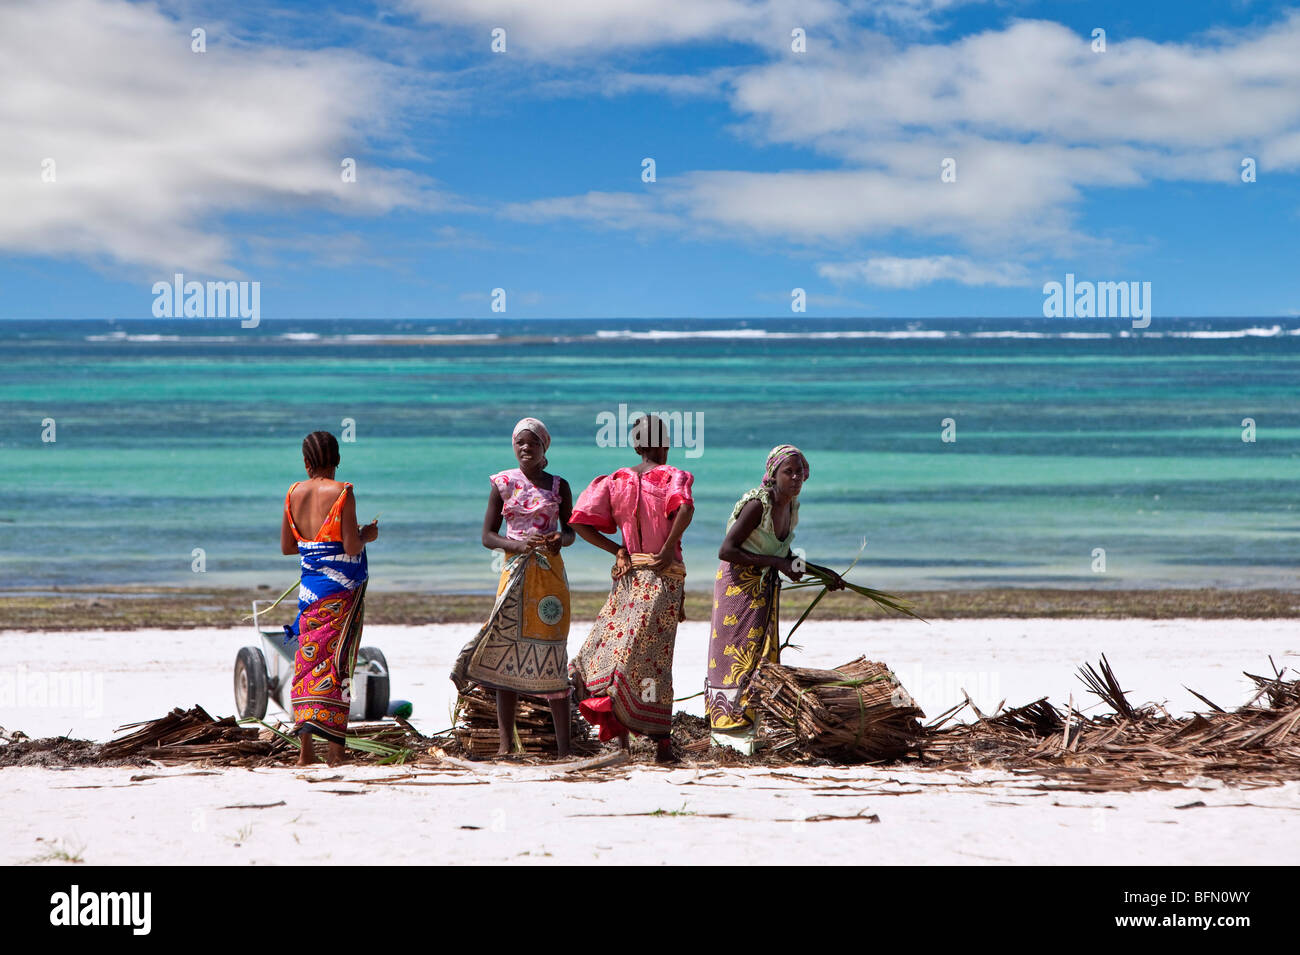 Kenya, Mombasa. Women gather makuti (dried coconut palm fronds used as roofing material) on a beach on Kenya south coast. Stock Photo